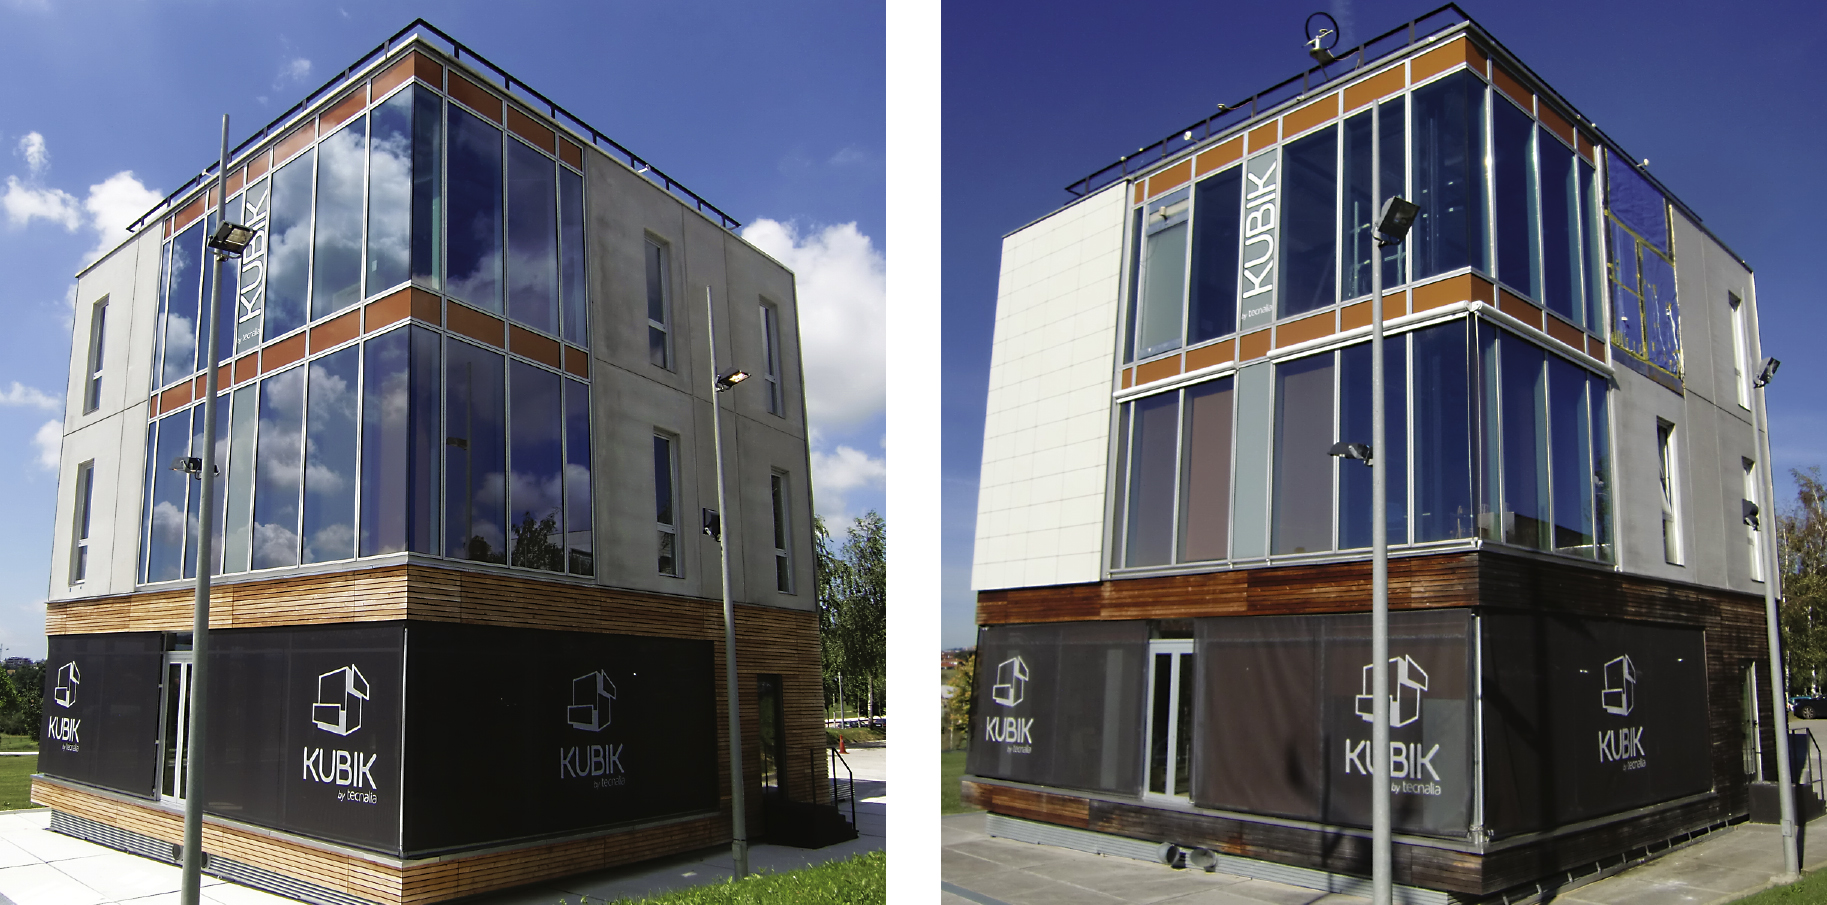 Left: South view of Kubik in 2010; right: in 2014, with several facade changes in between.